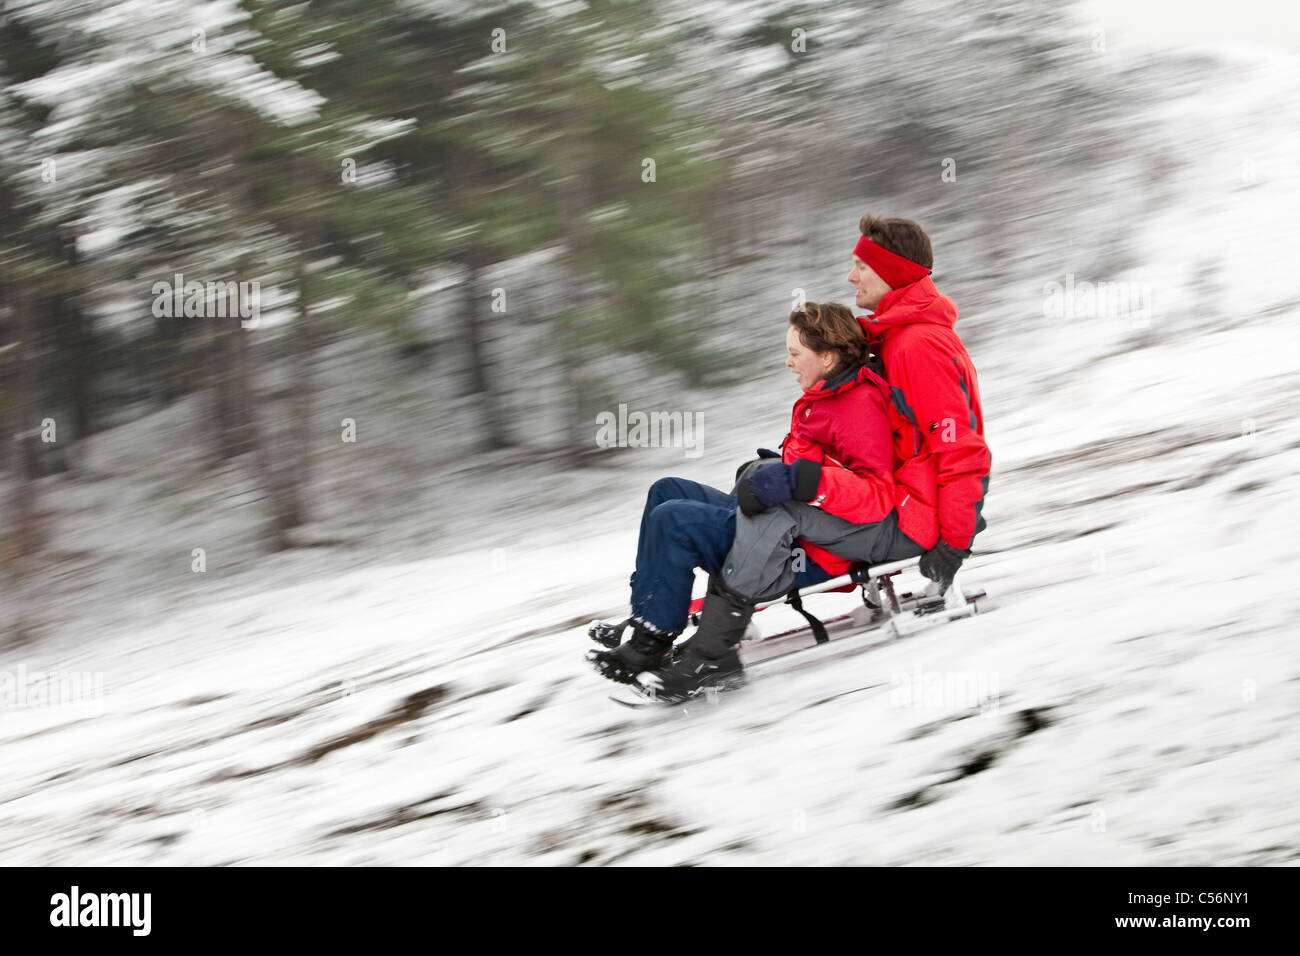 The Netherlands, Egmond aan Zee, Man and woman sledging. Stock Photo